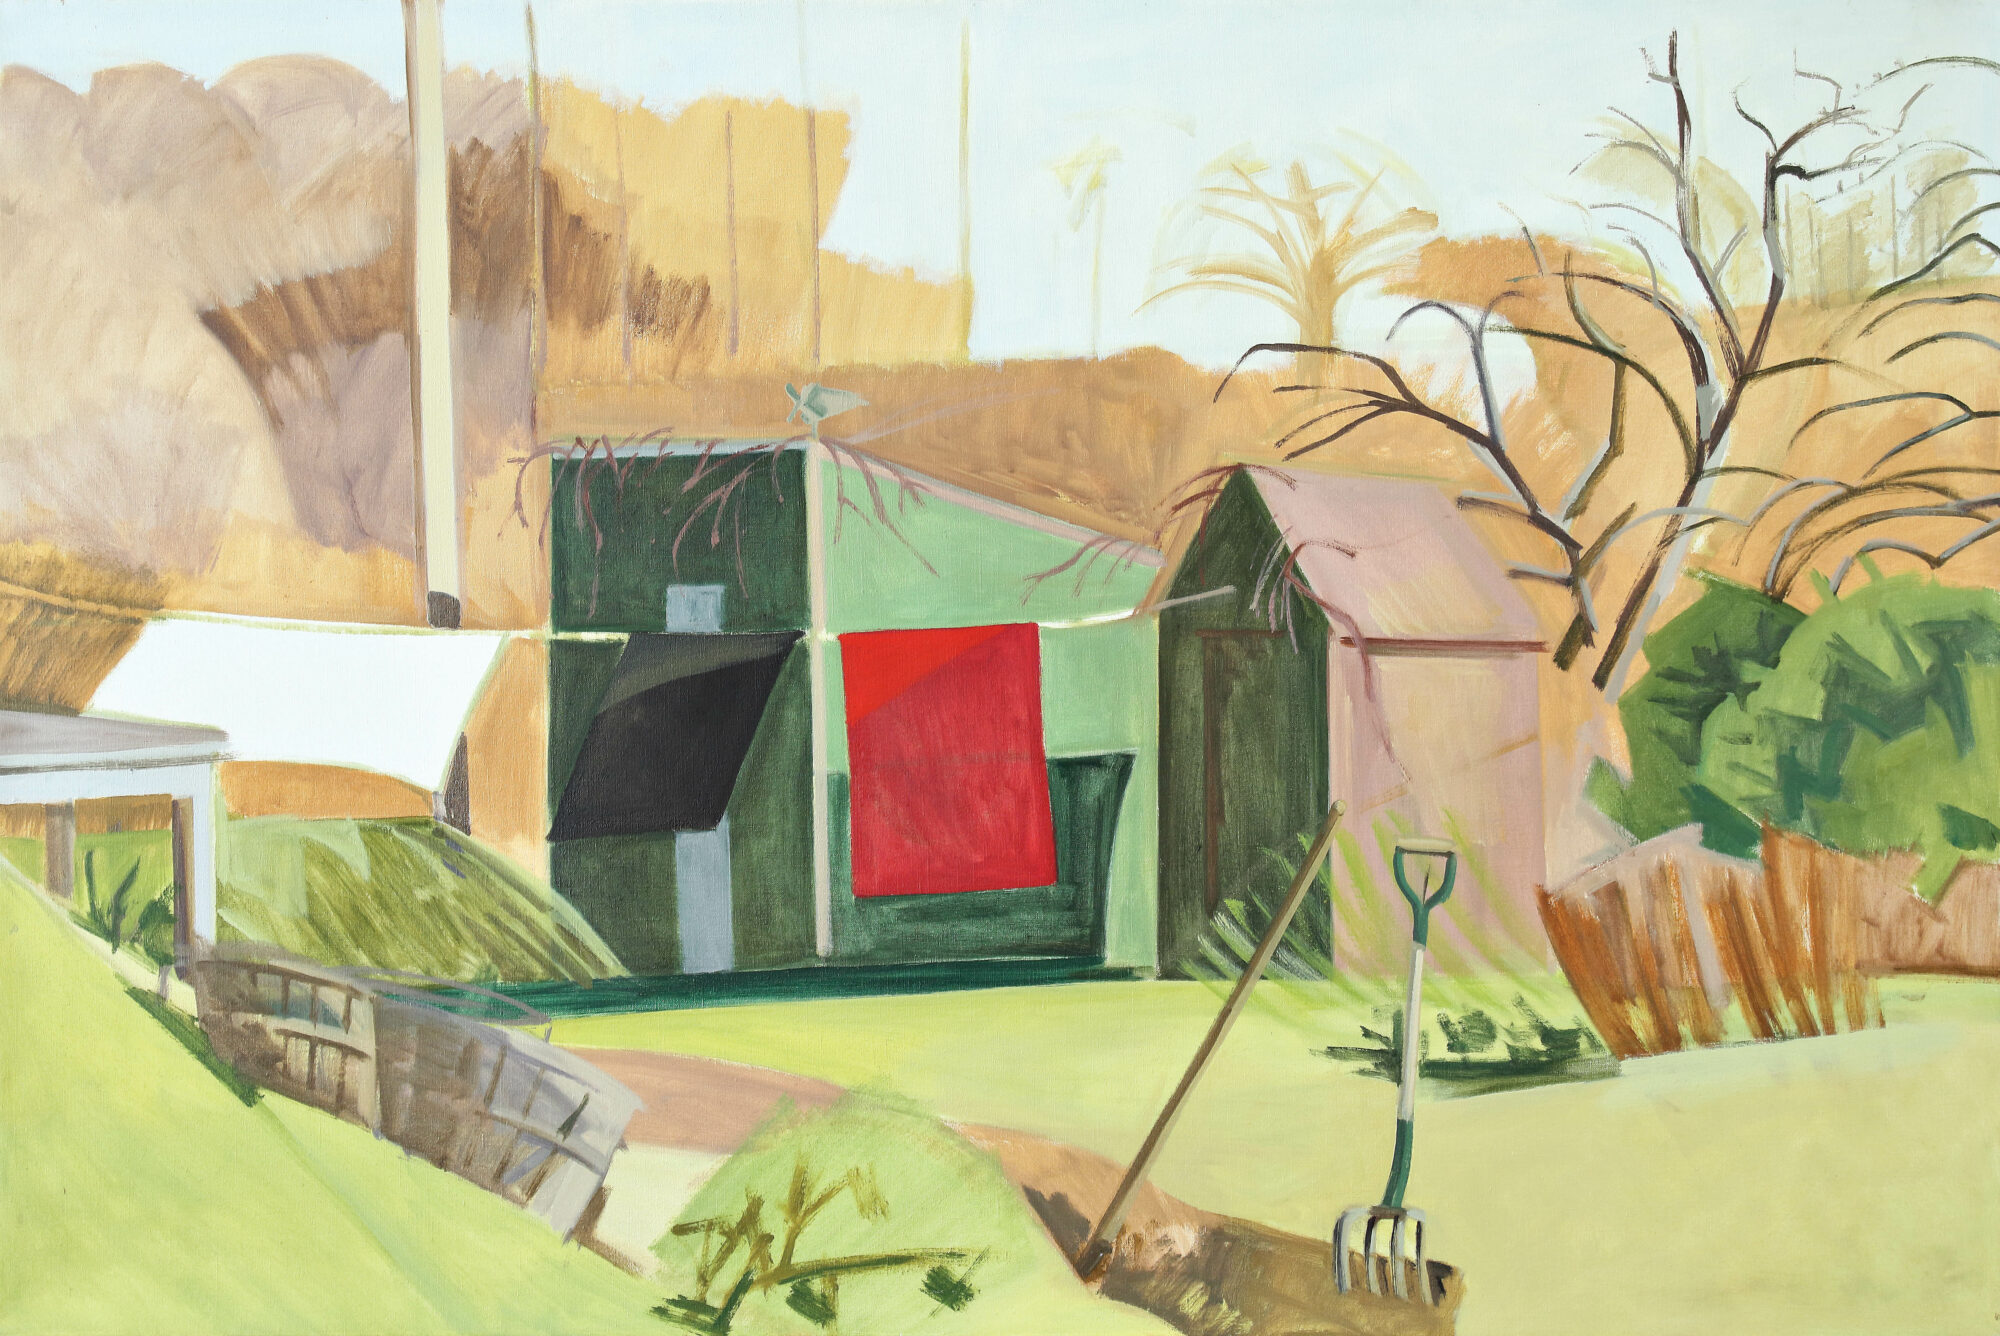 Lois Dodd painting showing a house with a pitchfork in the ground and clothes hanging on a line